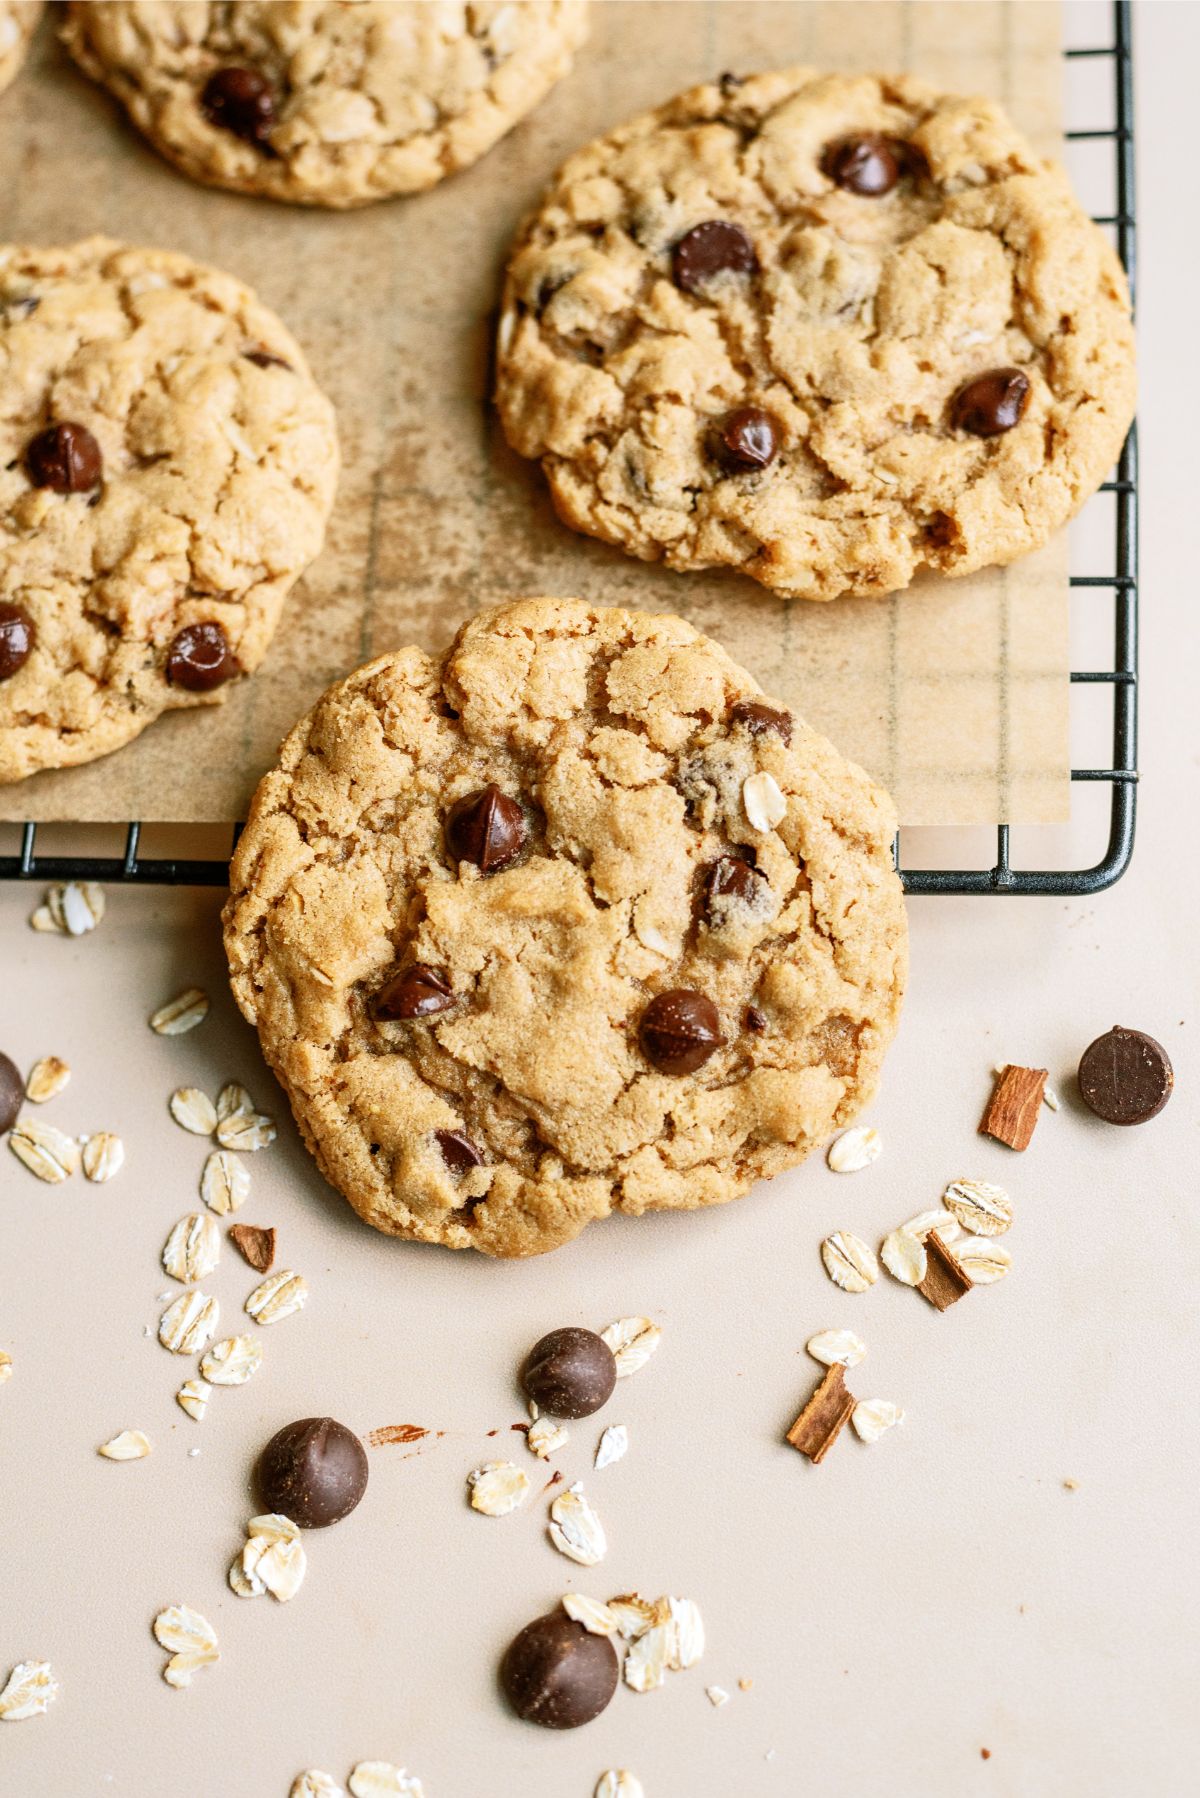 Oatmeal Chocolate Chip Peanut Butter Cookies Recipe